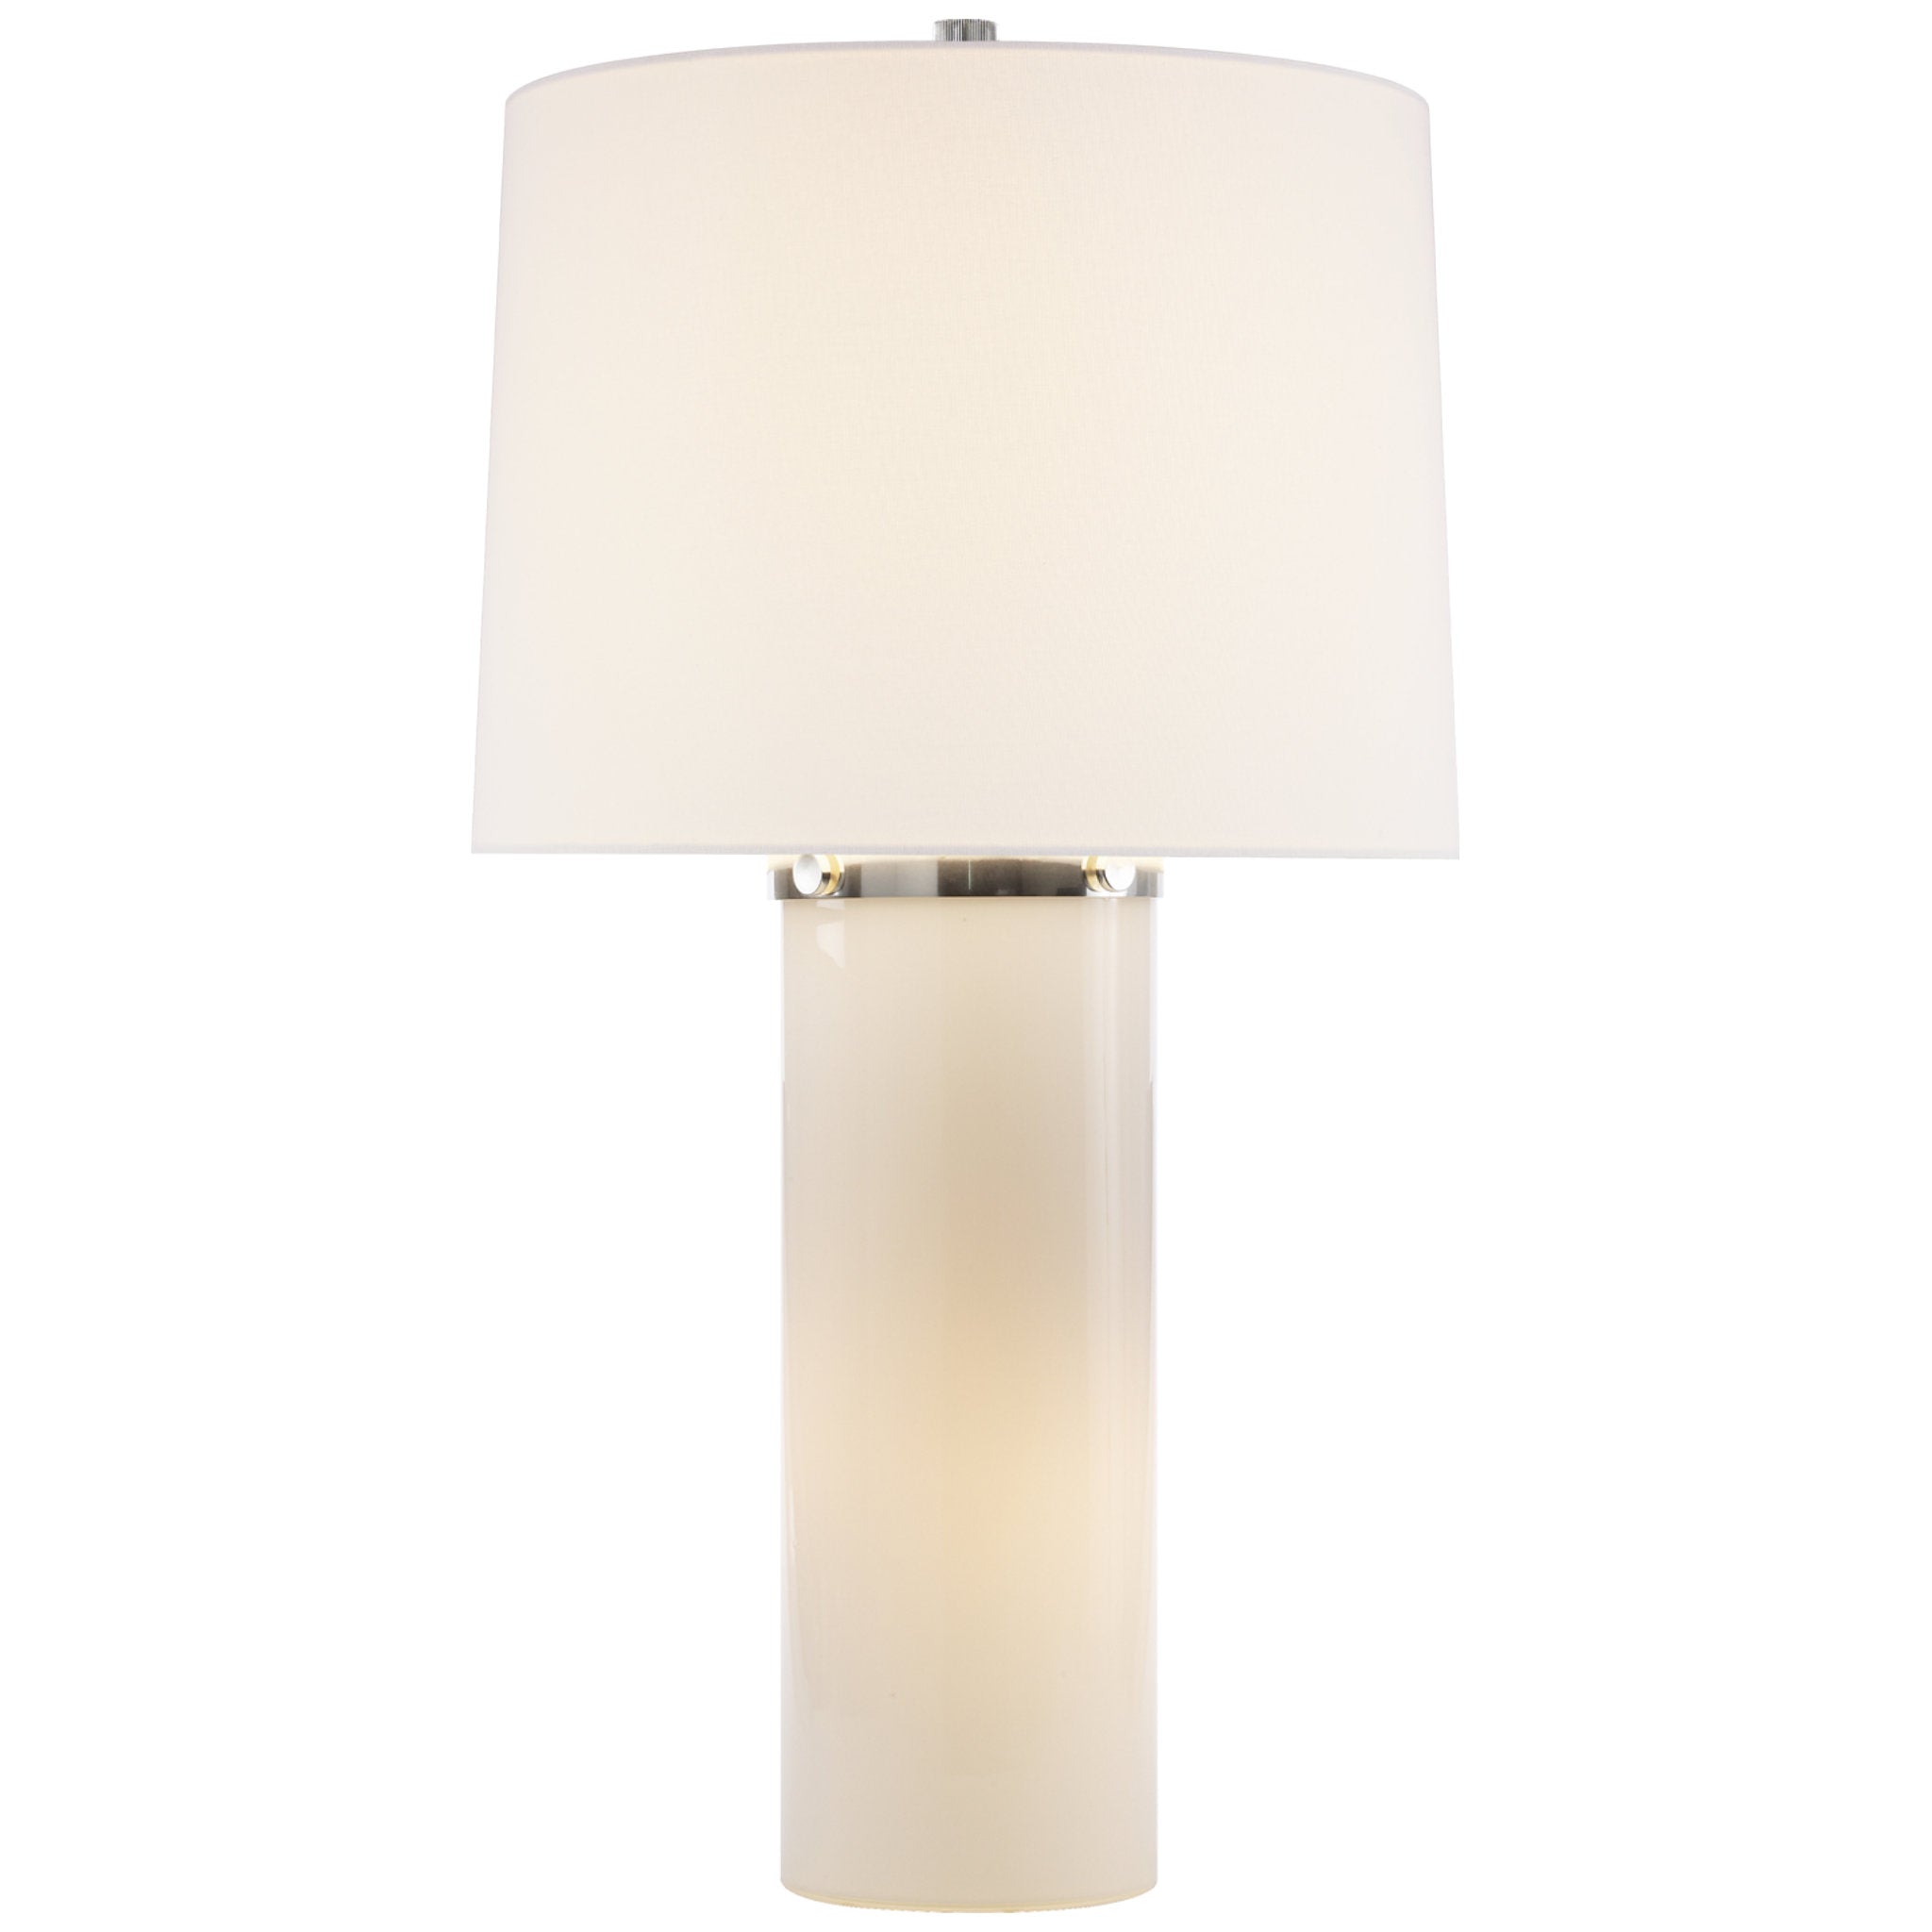 Barbara Barry Moon Glow Table Lamp in White Glass with Linen Shade